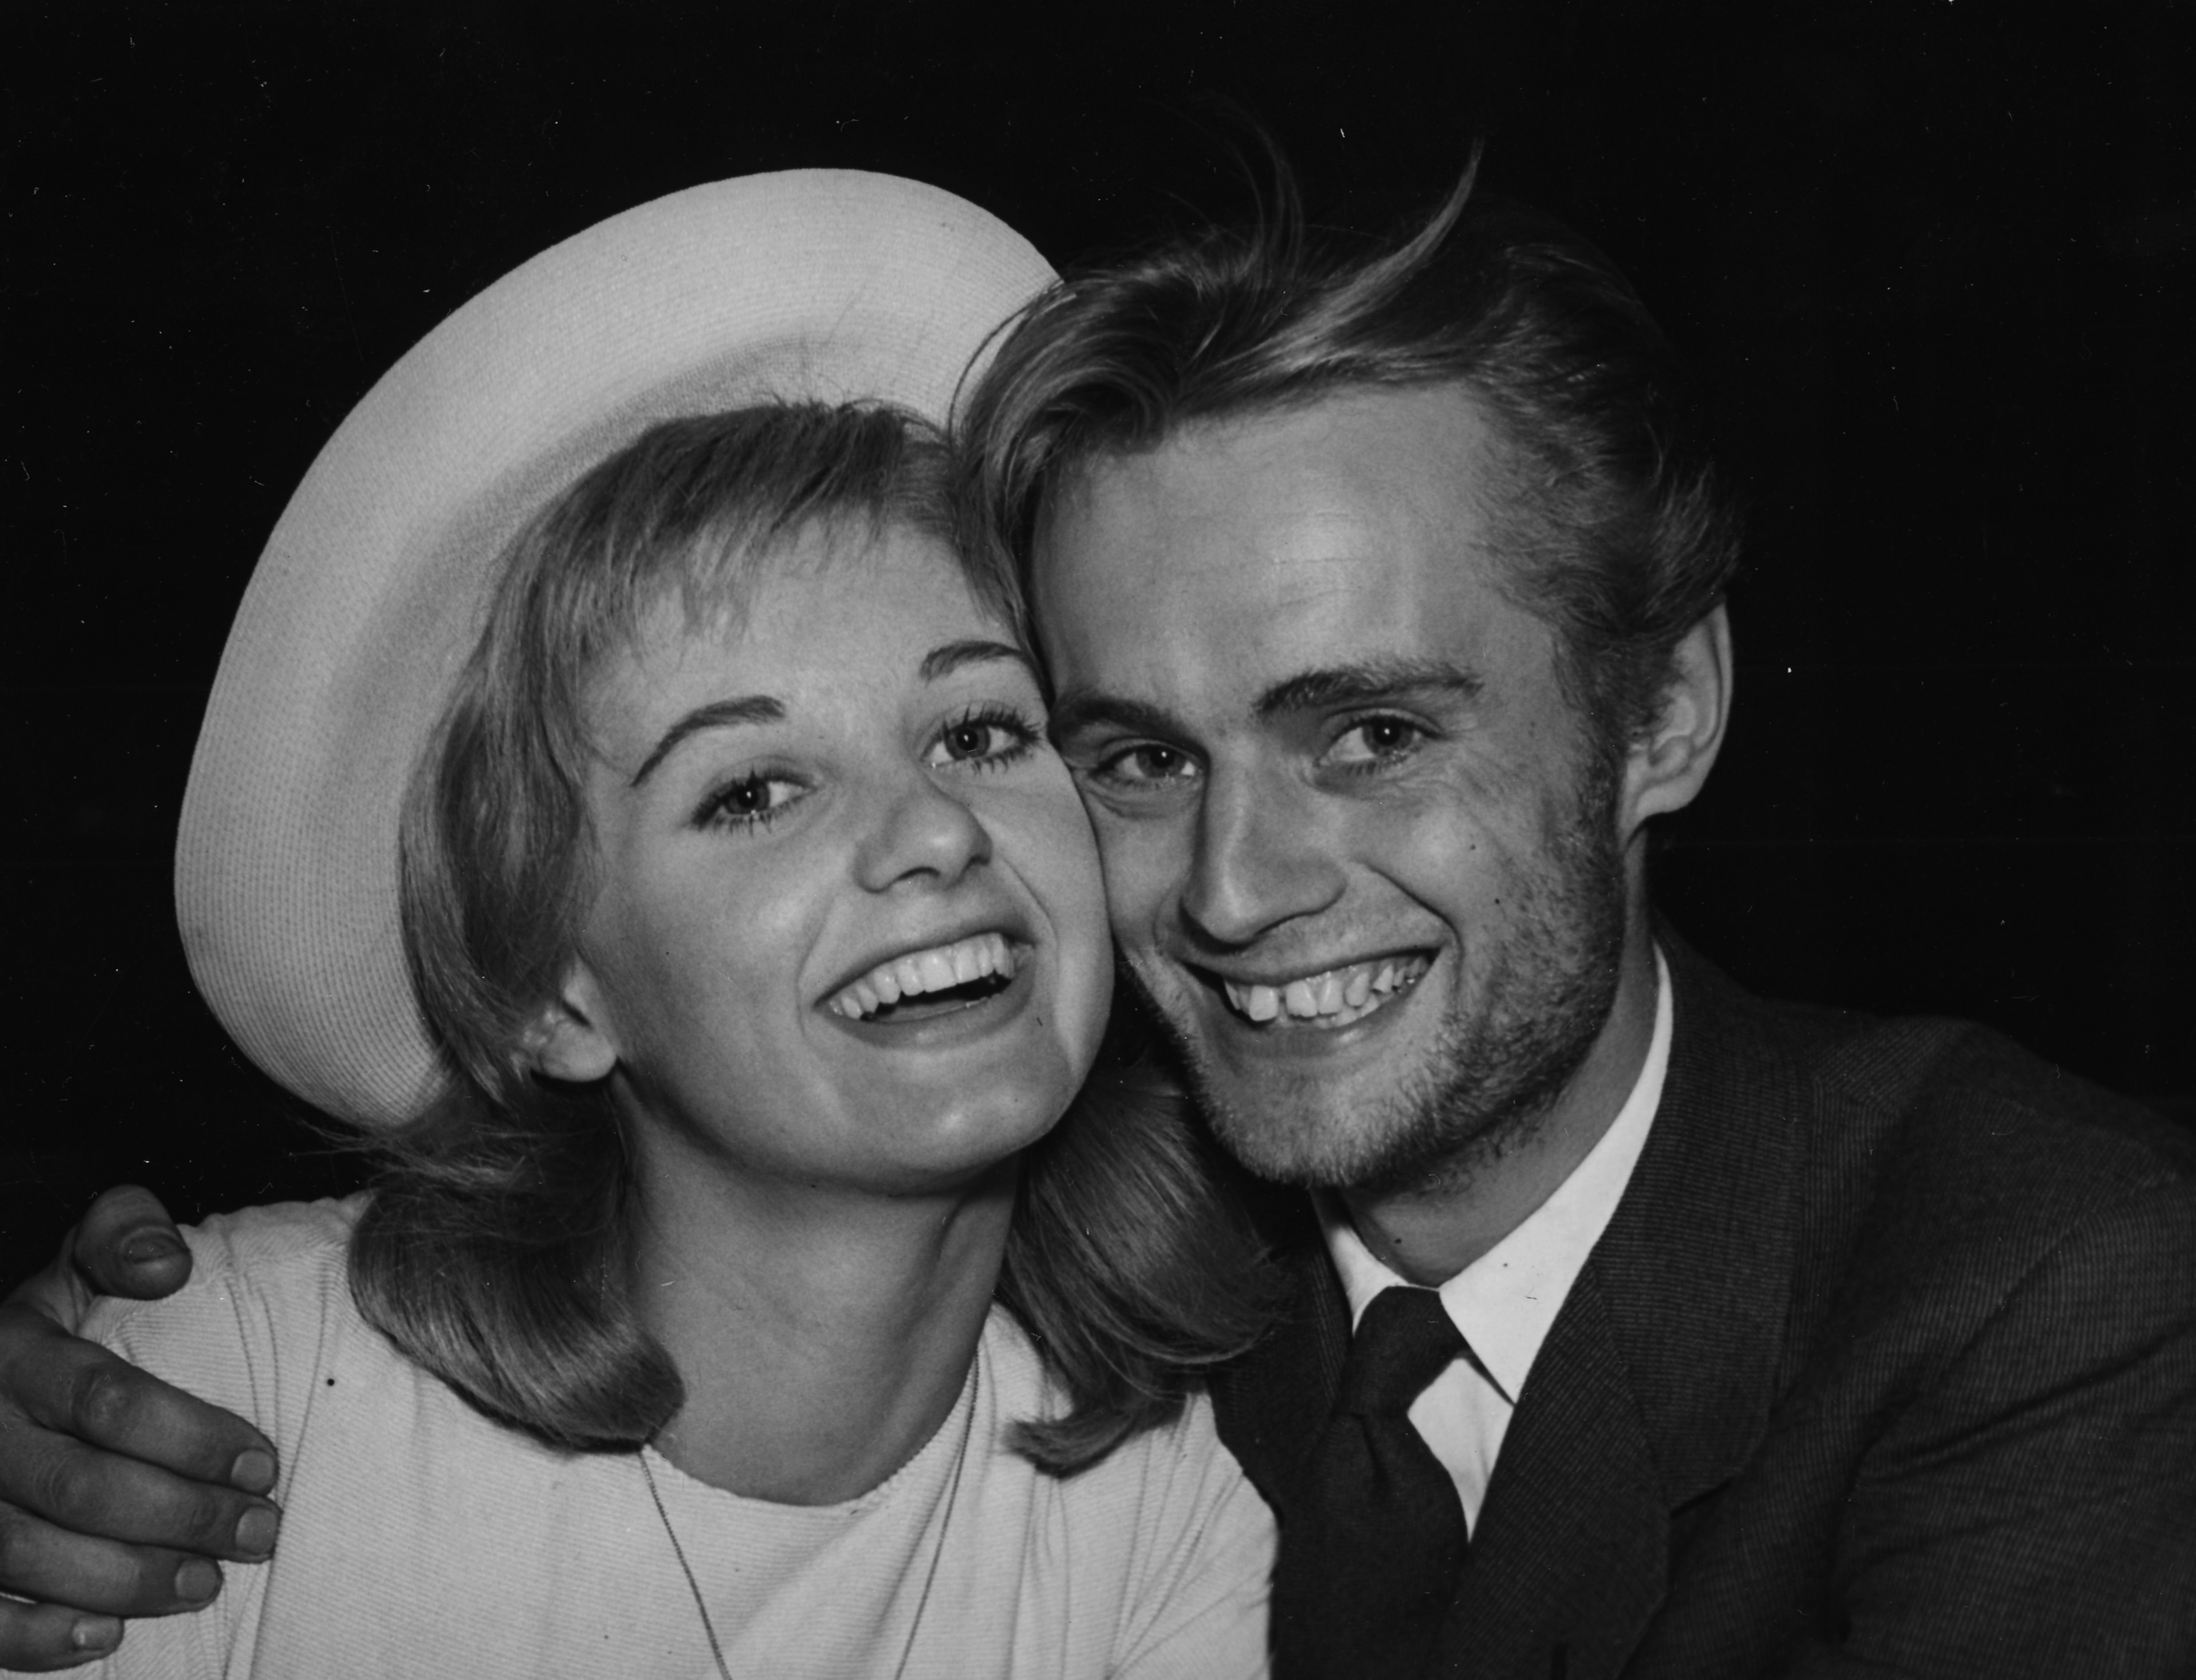 Jill Ireland and David McCallum smiling following their wedding at a registry office in London, May 13th 1957 | Source: Getty Images 